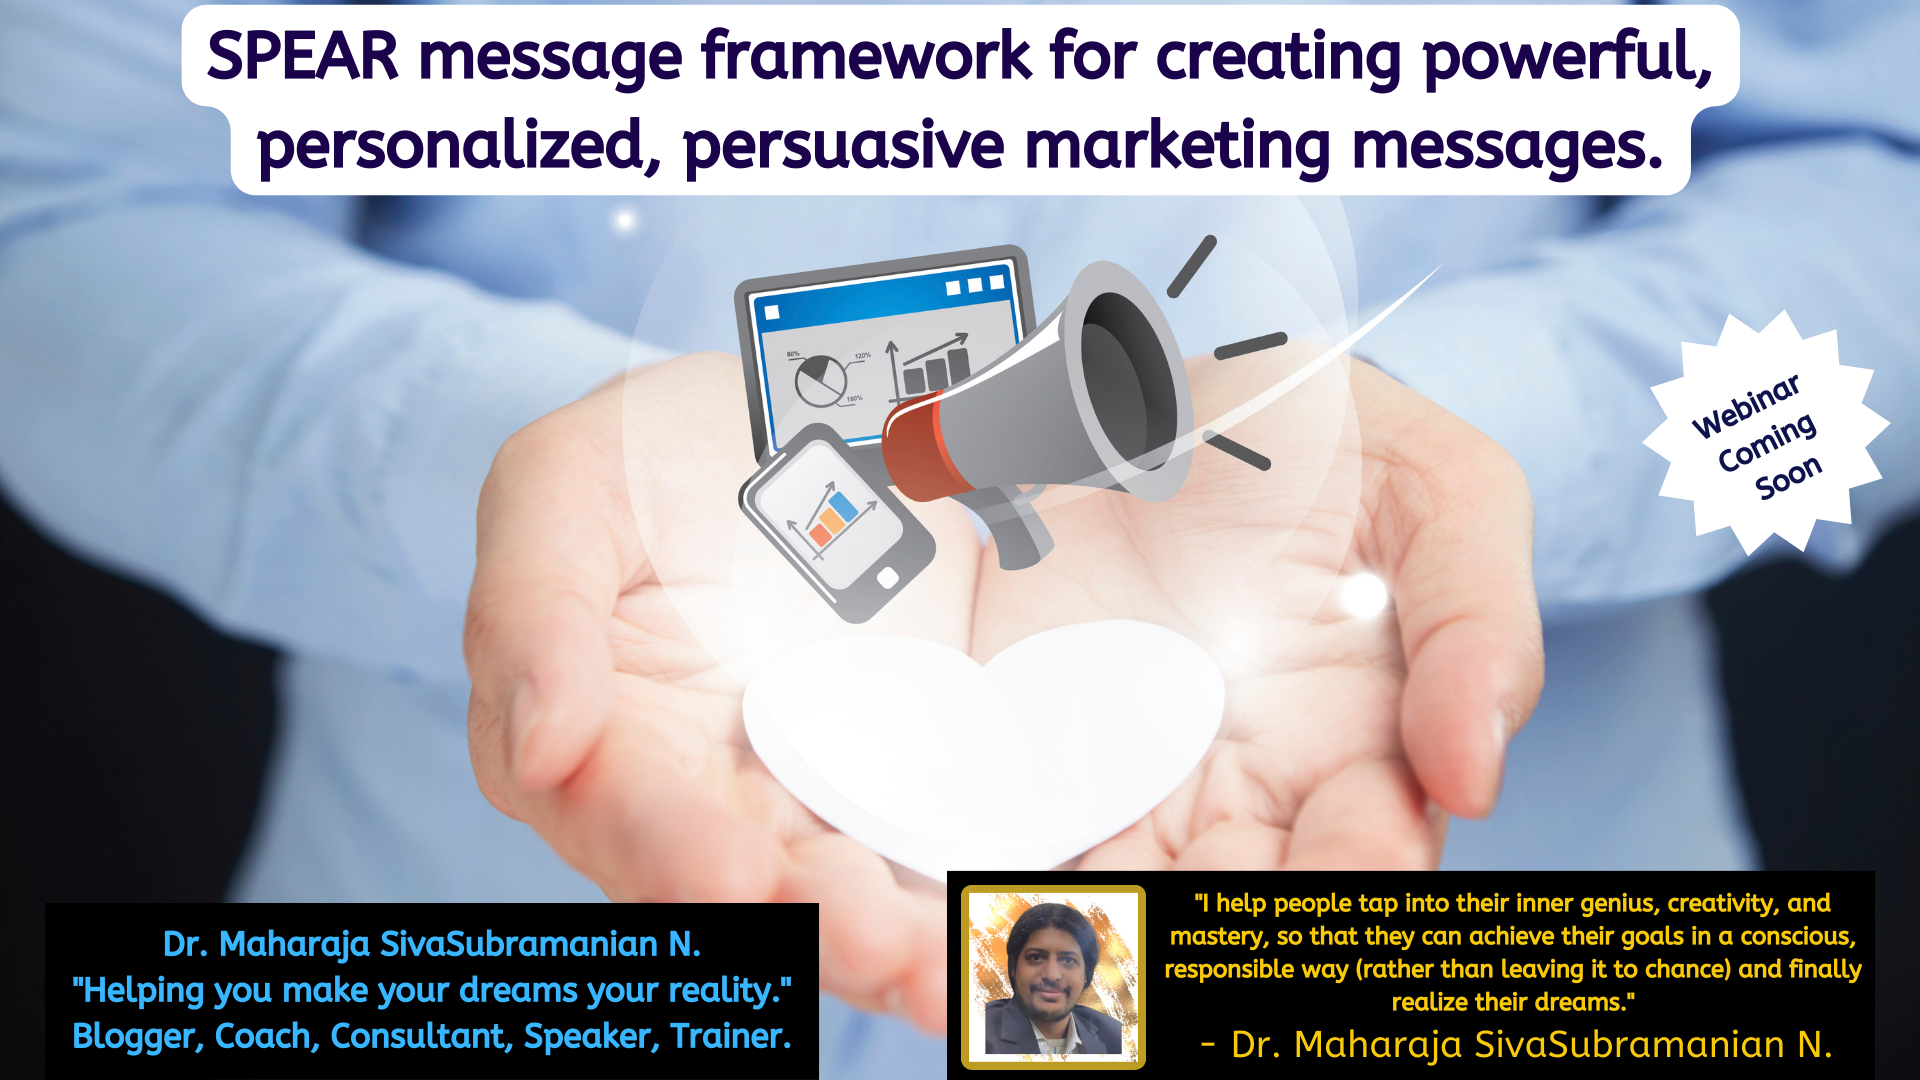 SPEAR message framework for creating powerful, personalized, persuasive marketing messages.